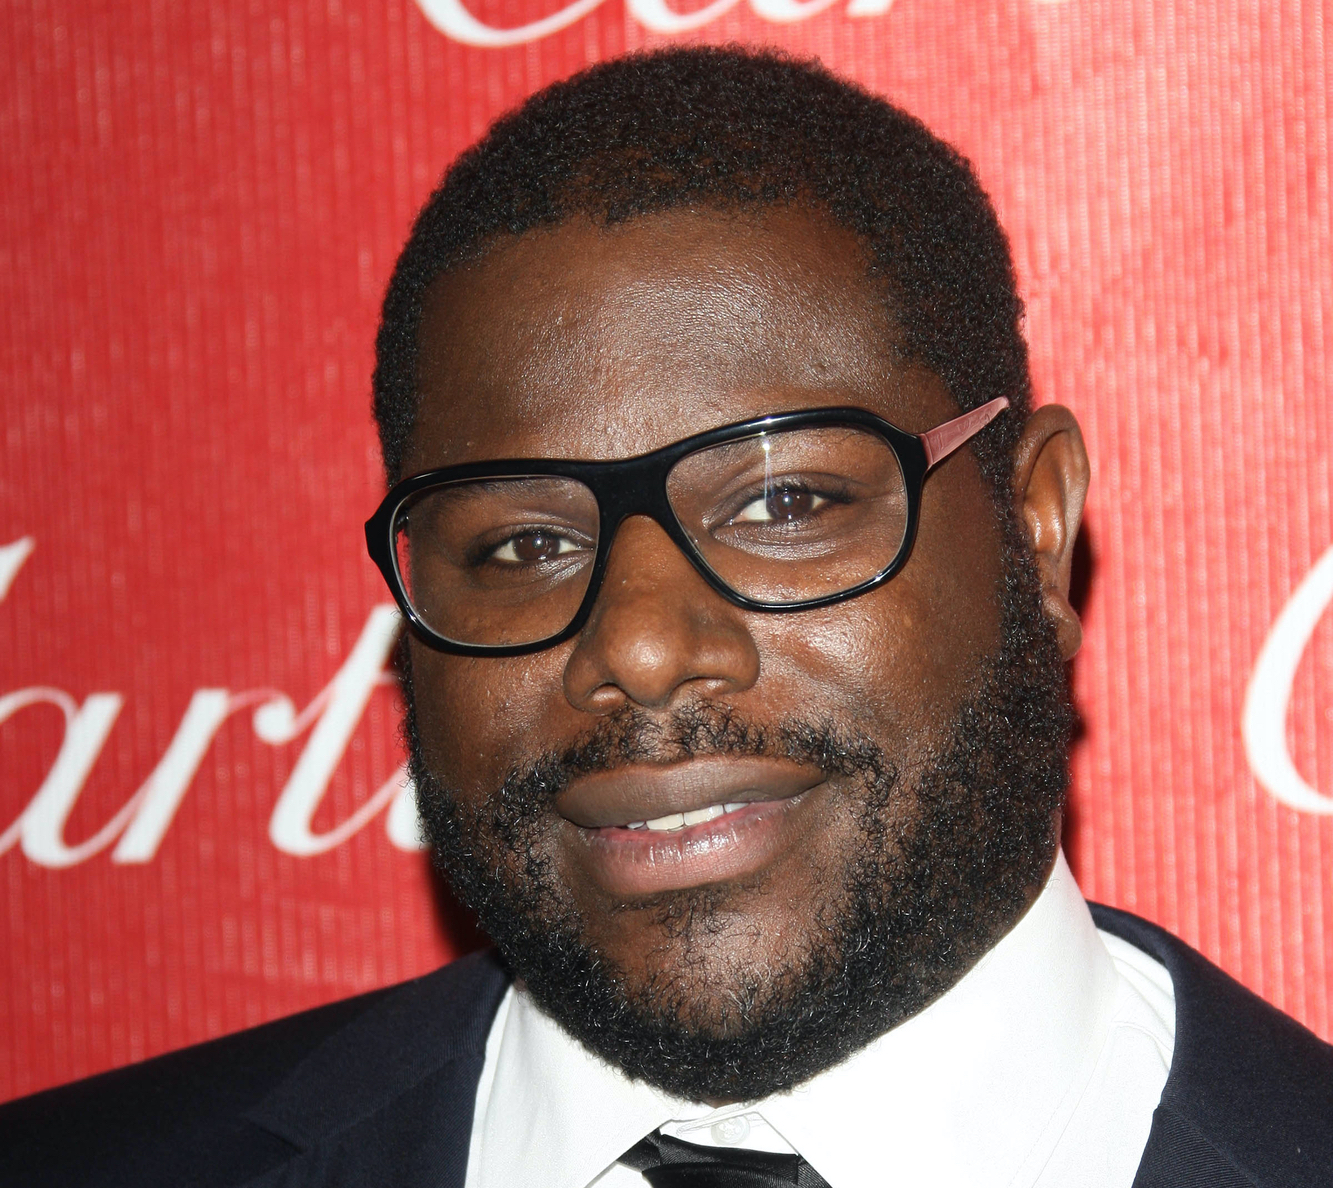 Jamaican Book “Augustown” Being Adapted For Feature Film by Steve McQueen